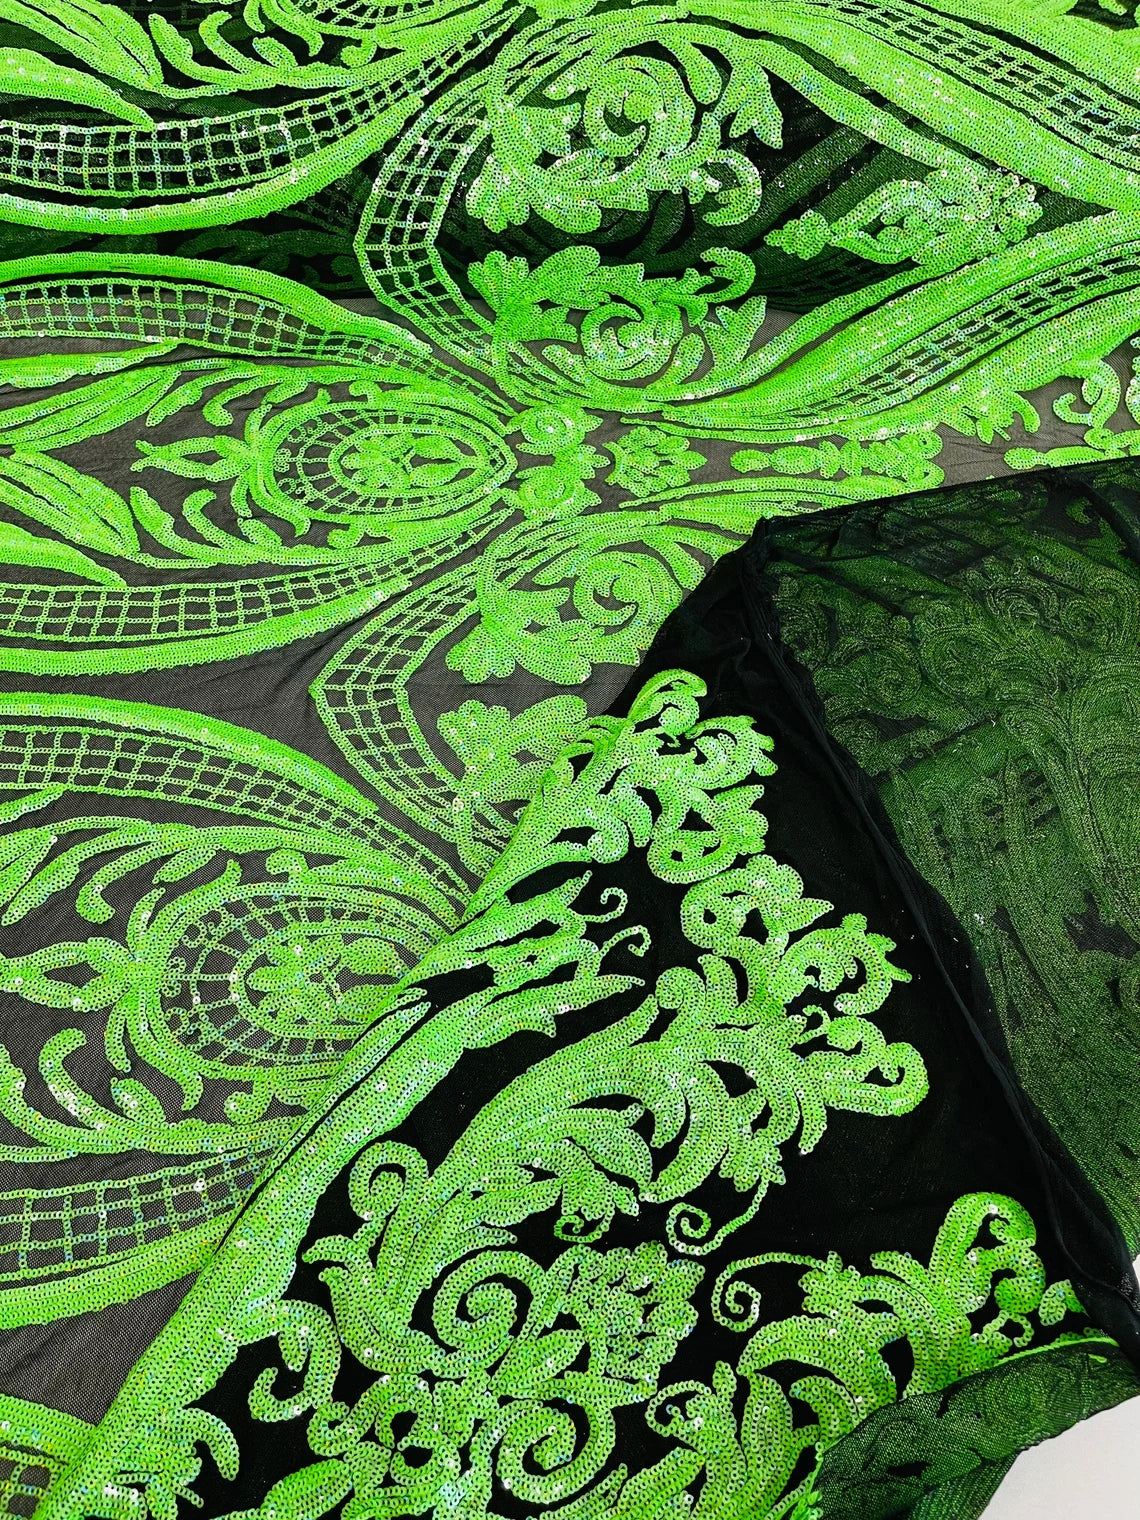 Big Damask 4 Way Sequins - Neon Green on Black - Embroidered Damask Design Sequins Fabric Sold By Yard